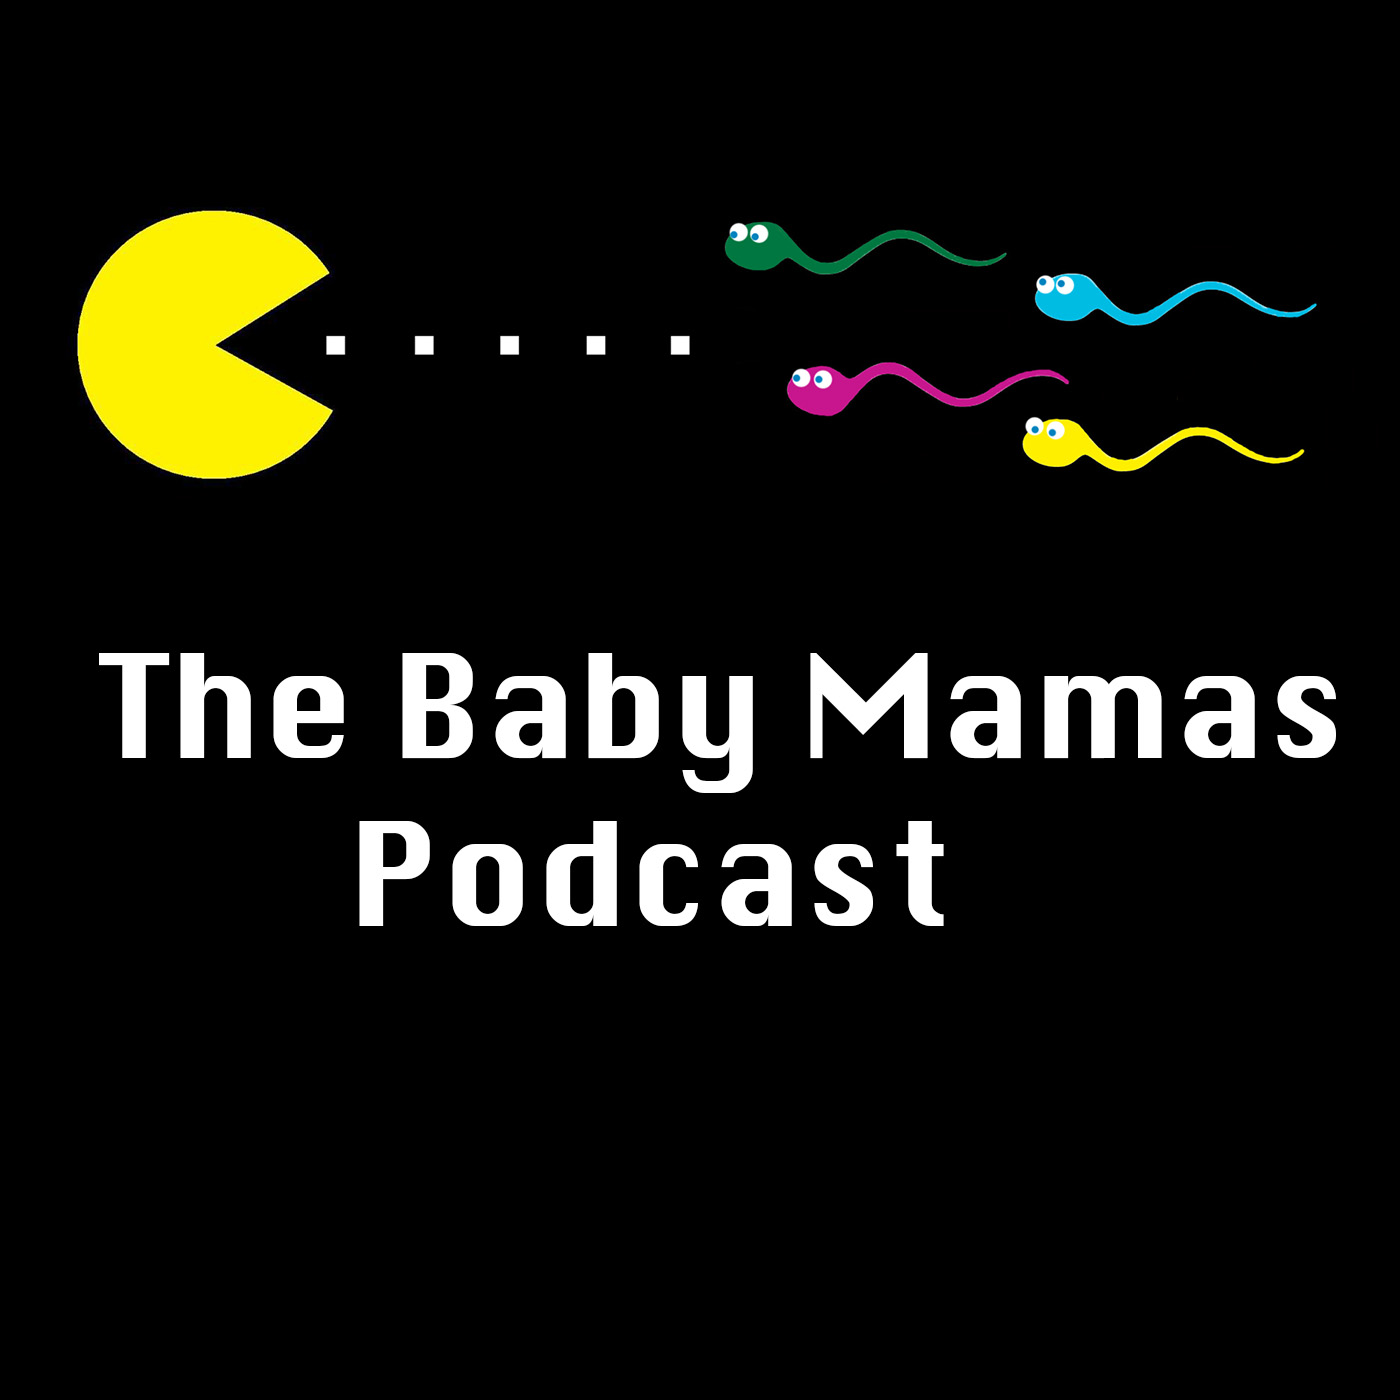 The Baby Mamas Podcast